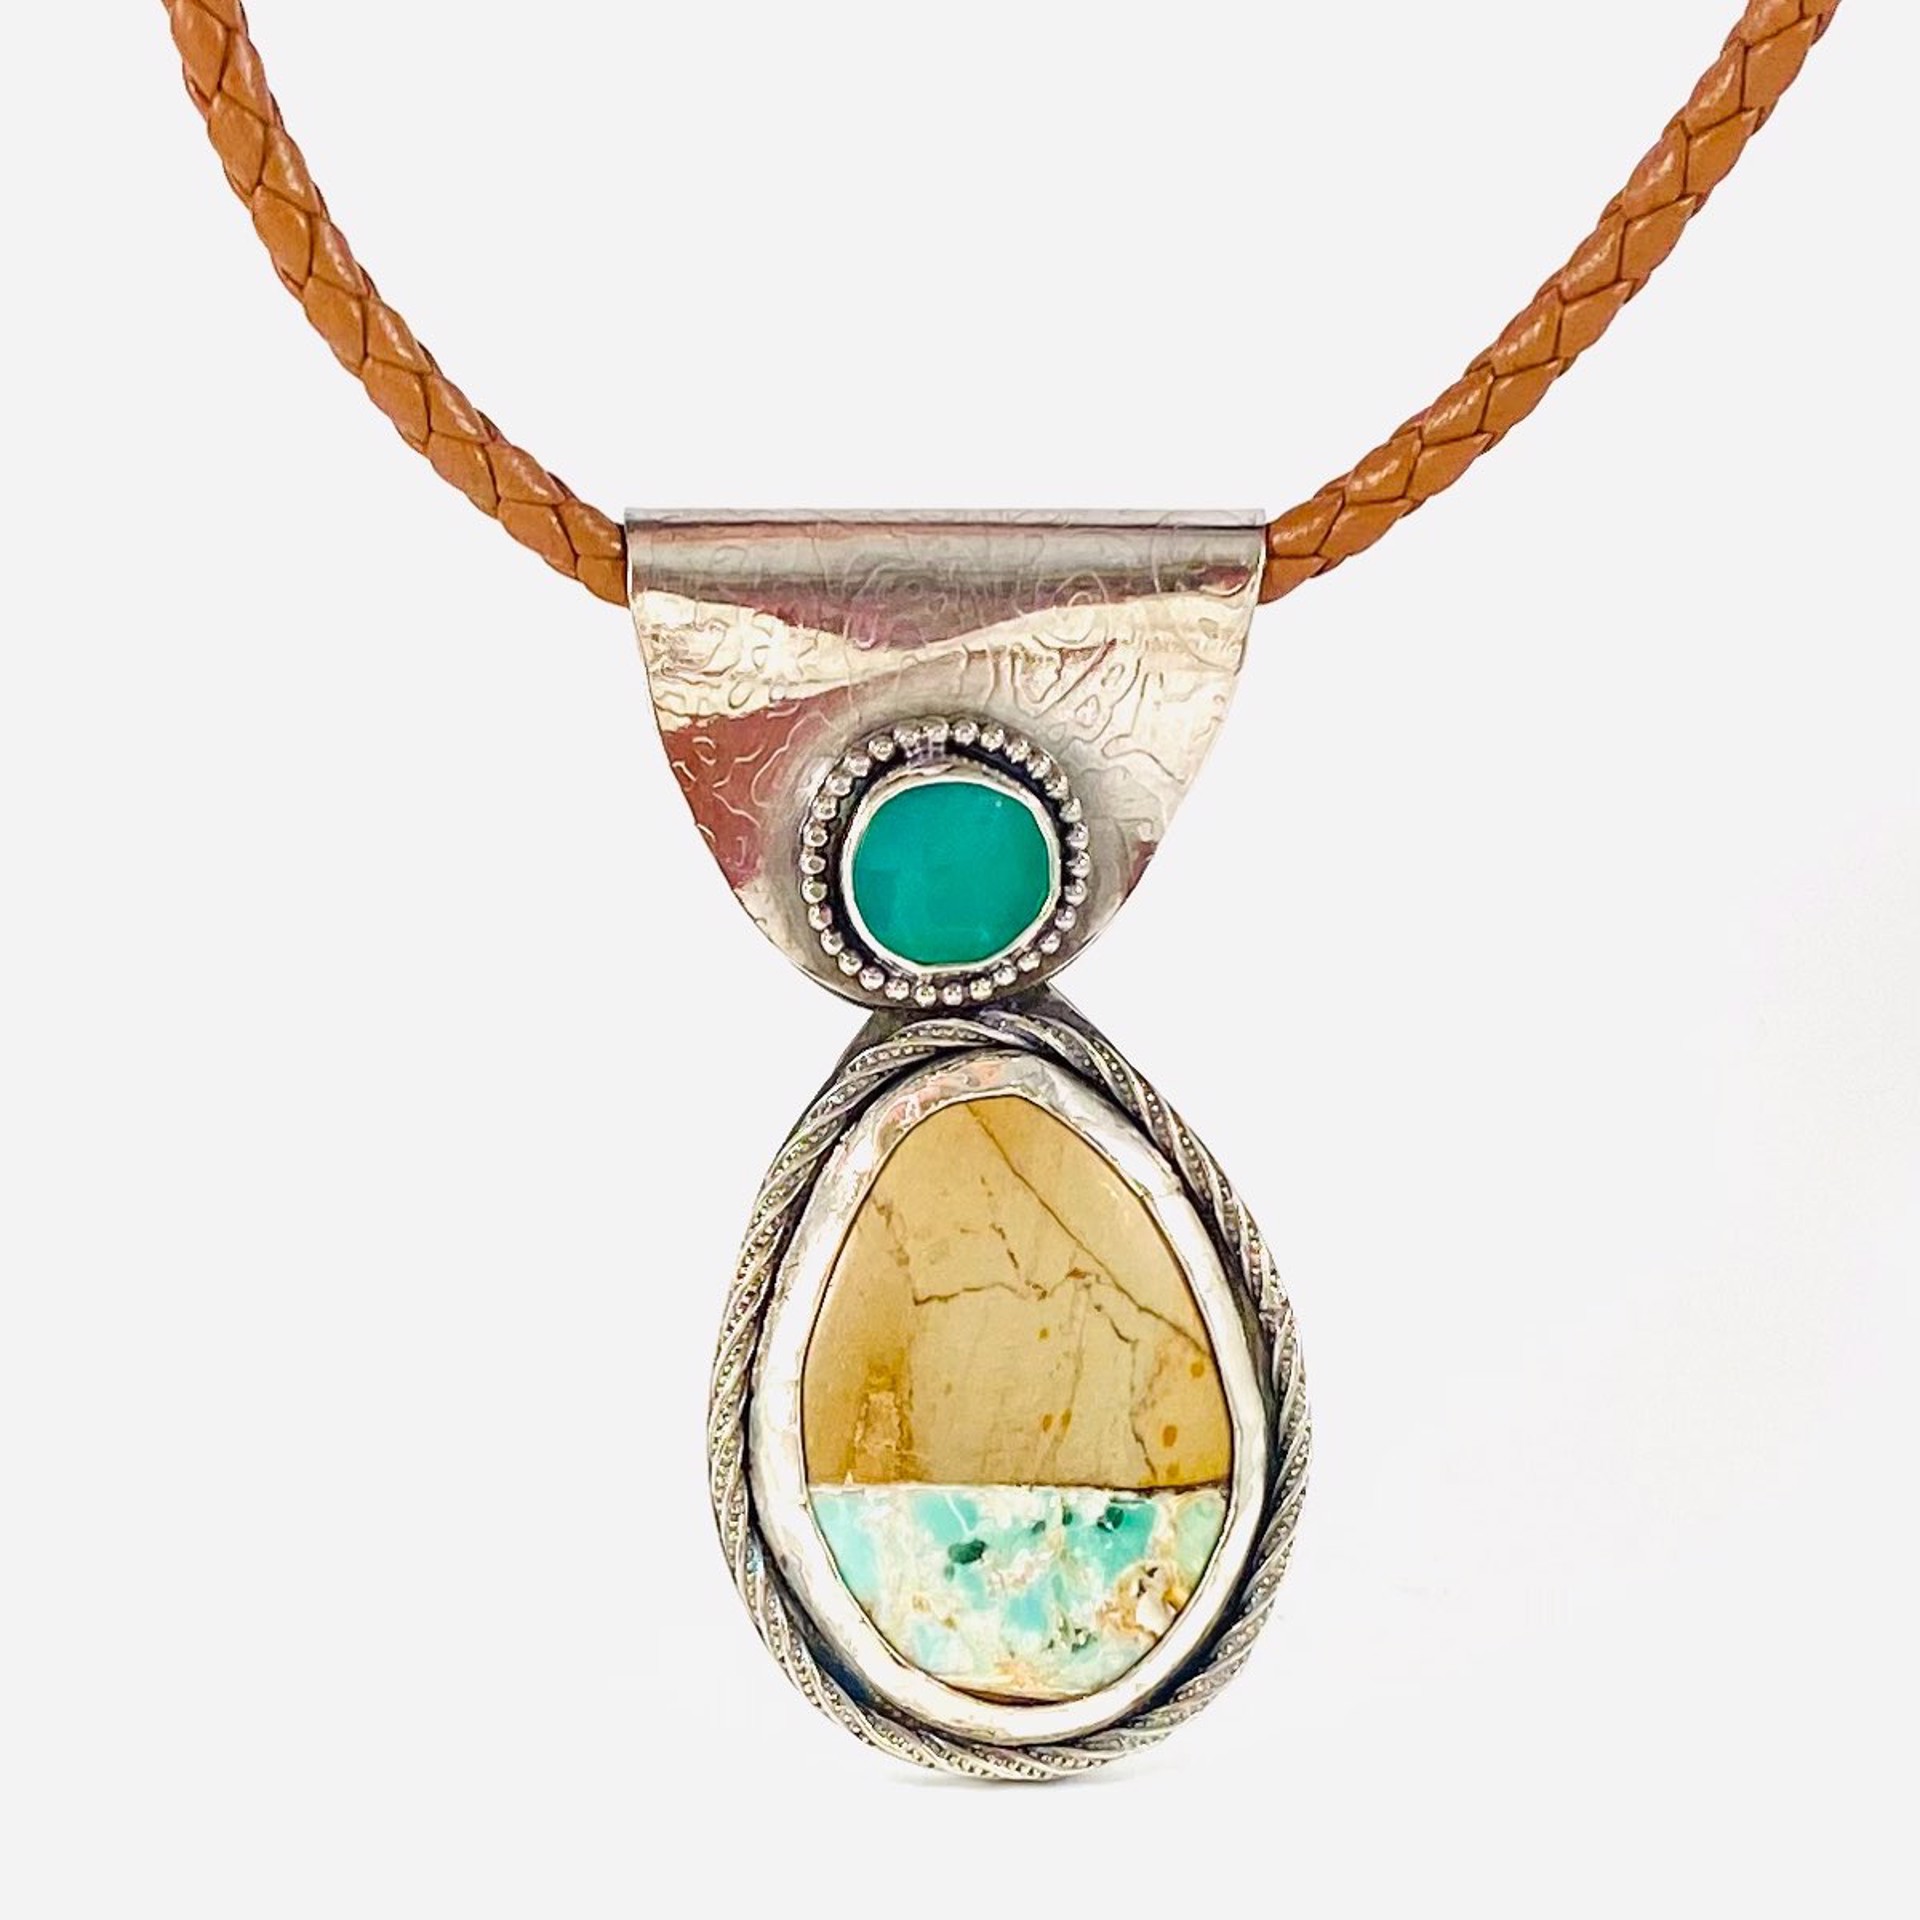 Teardrop Variscite  with Rope Bezel with beaded bezel Round Chrysoprase with beaded Bezel 3"Pendant on Braided Leather Necklace AB23-97 by Anne Bivens